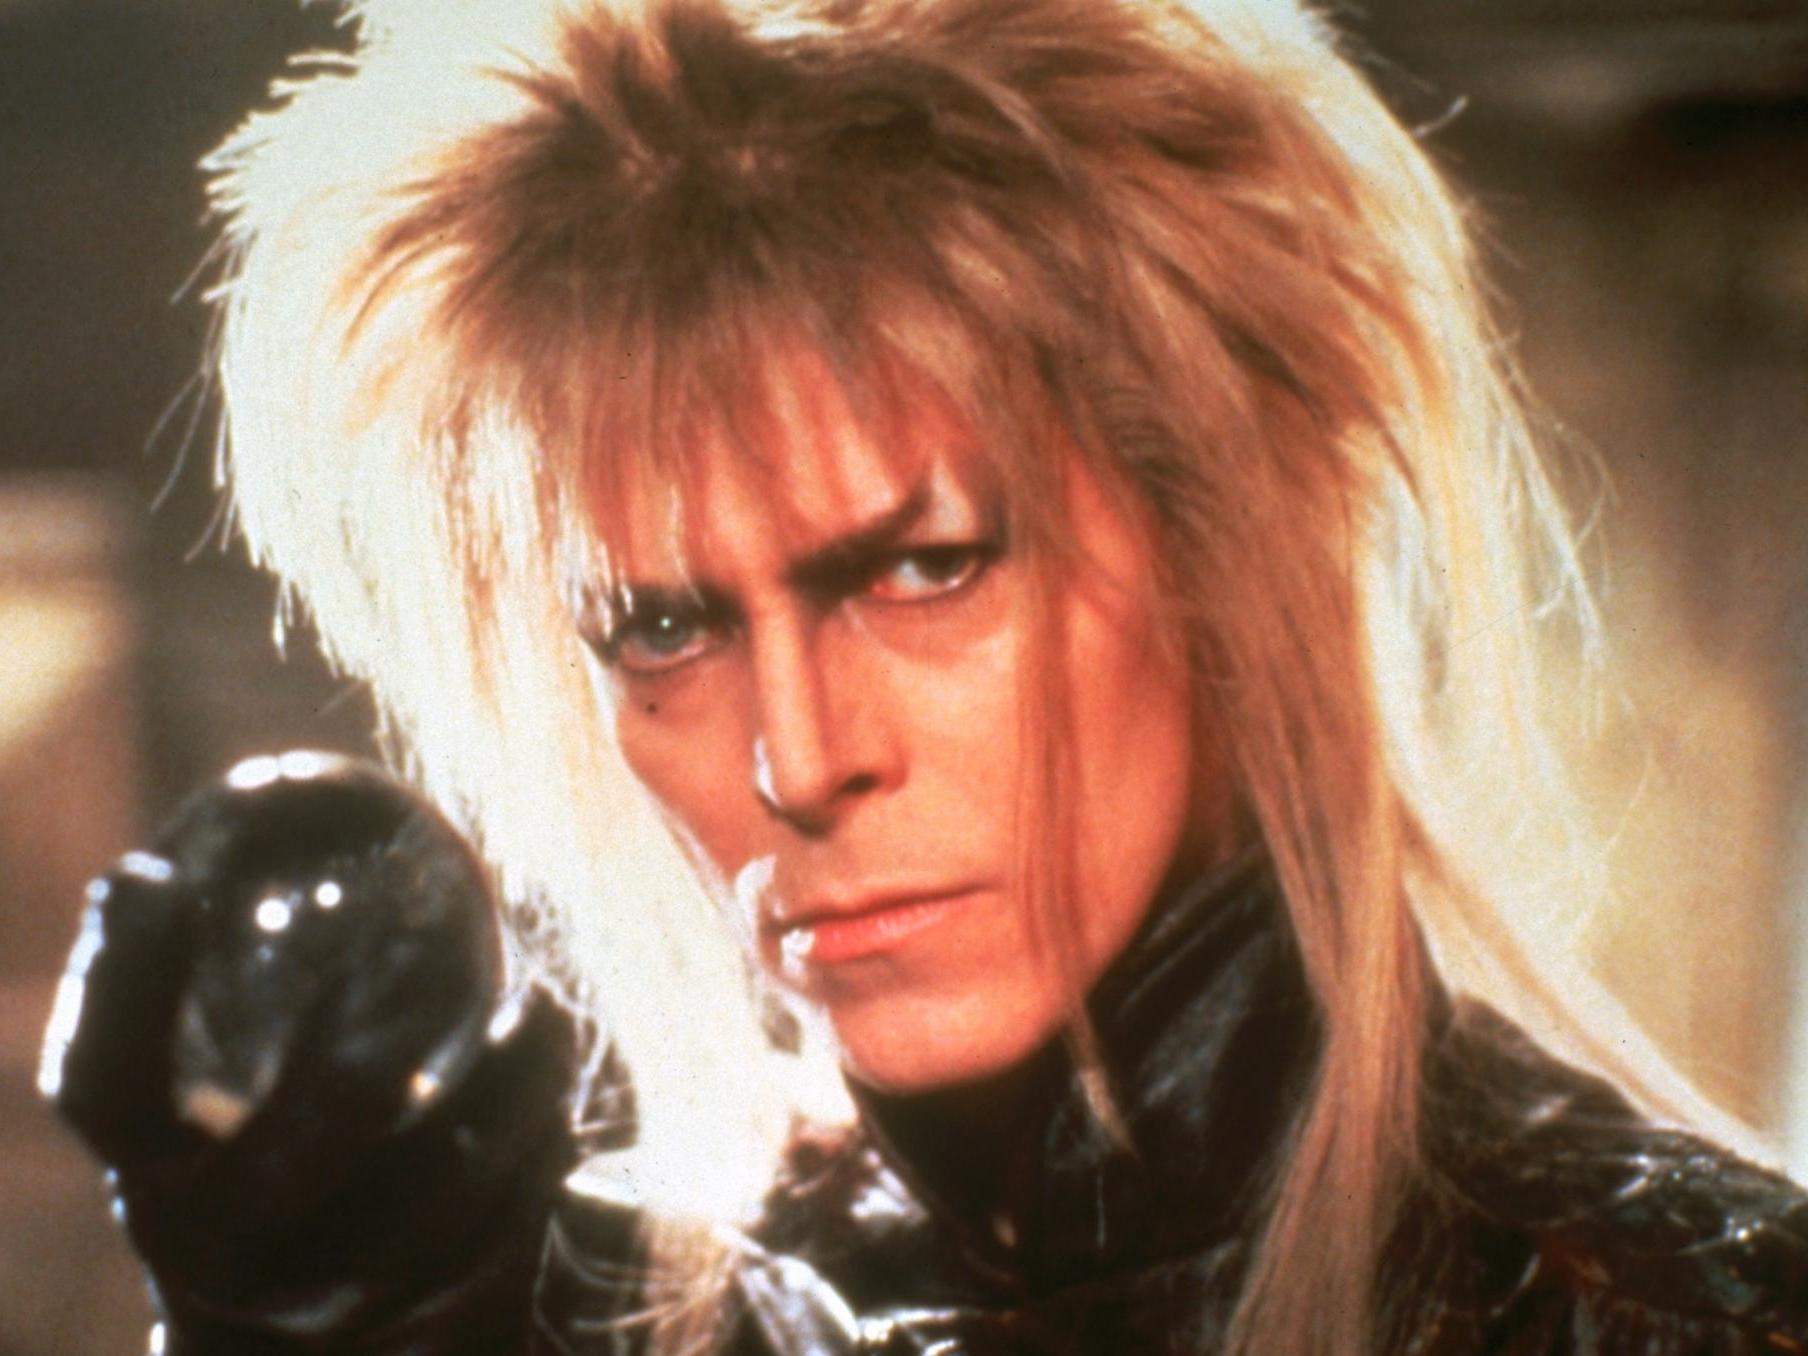 https://static.independent.co.uk/s3fs-public/thumbnails/image/2016/01/25/08/Bowie-Labyrinth.jpg